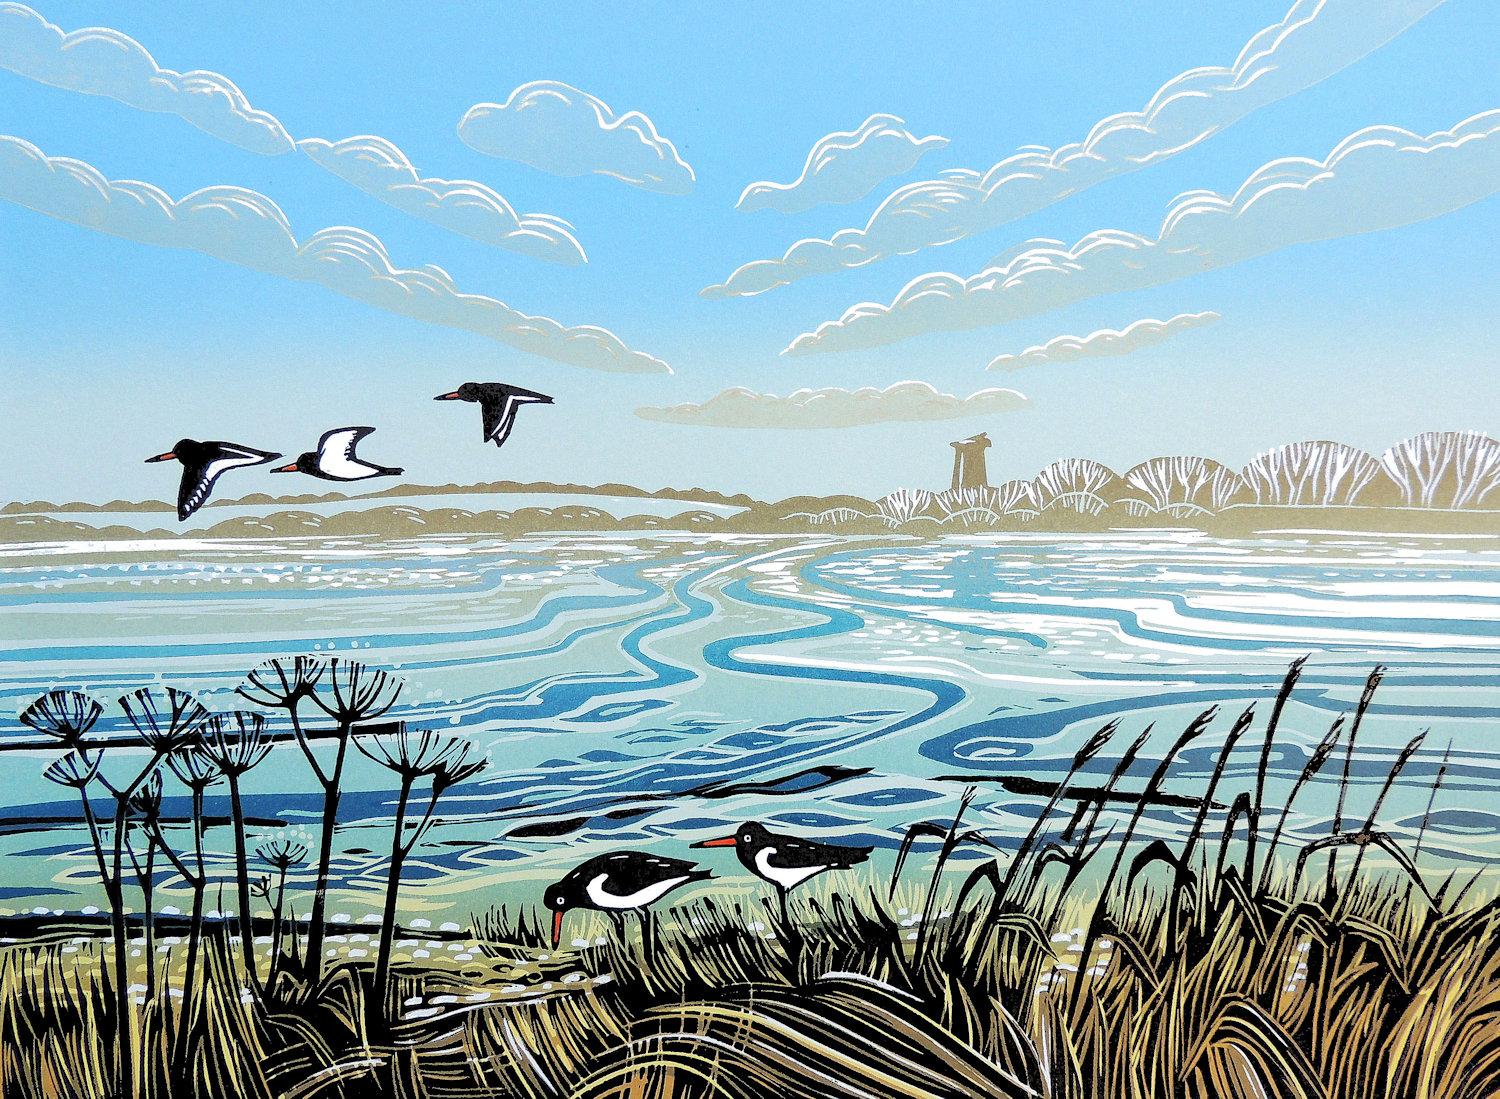 Waterway by Rob Barnes [2021]

Last one available. The inspiration for this was seeing clouds and ripples on the river. I was trying to create movement in the design and include some Oystercatchers. My work involves blending colours and graduating